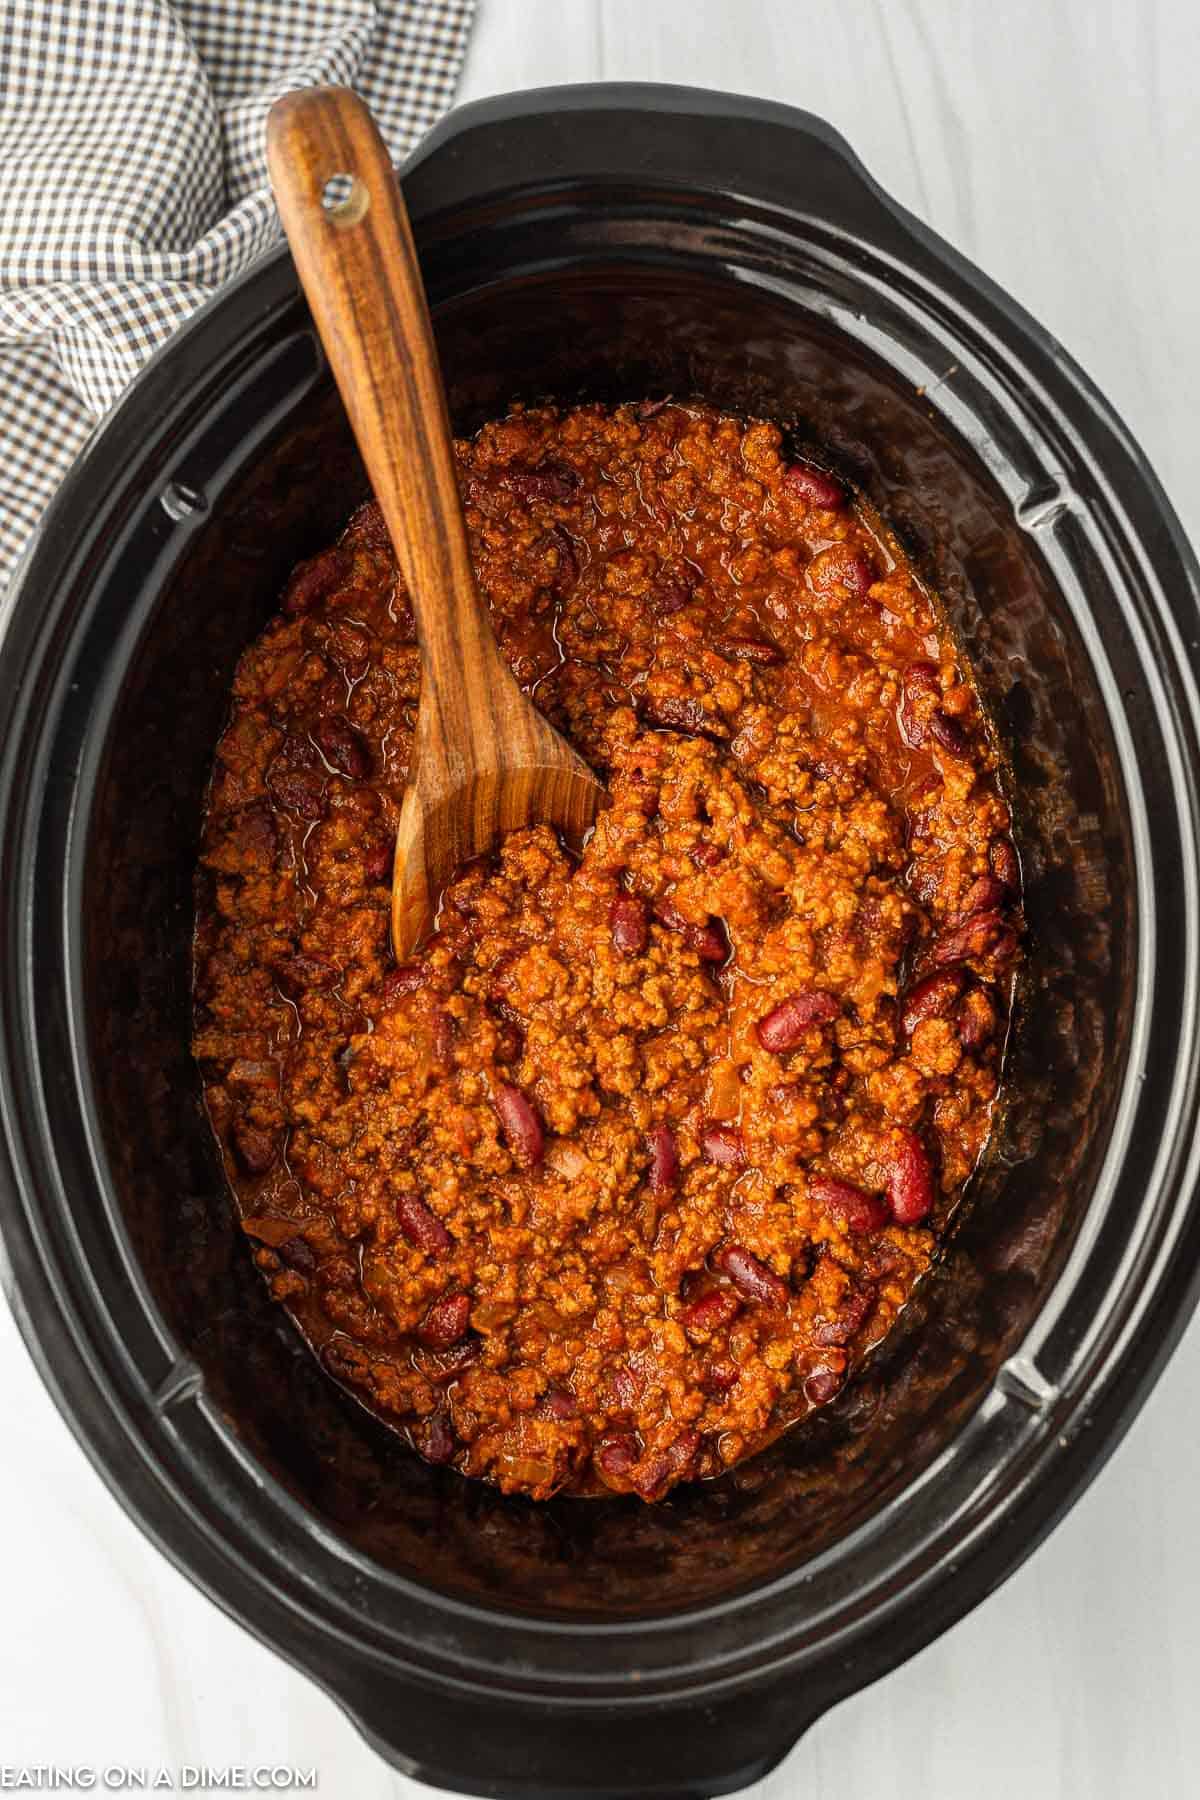 Chili in a crock pot with a wooden spoon